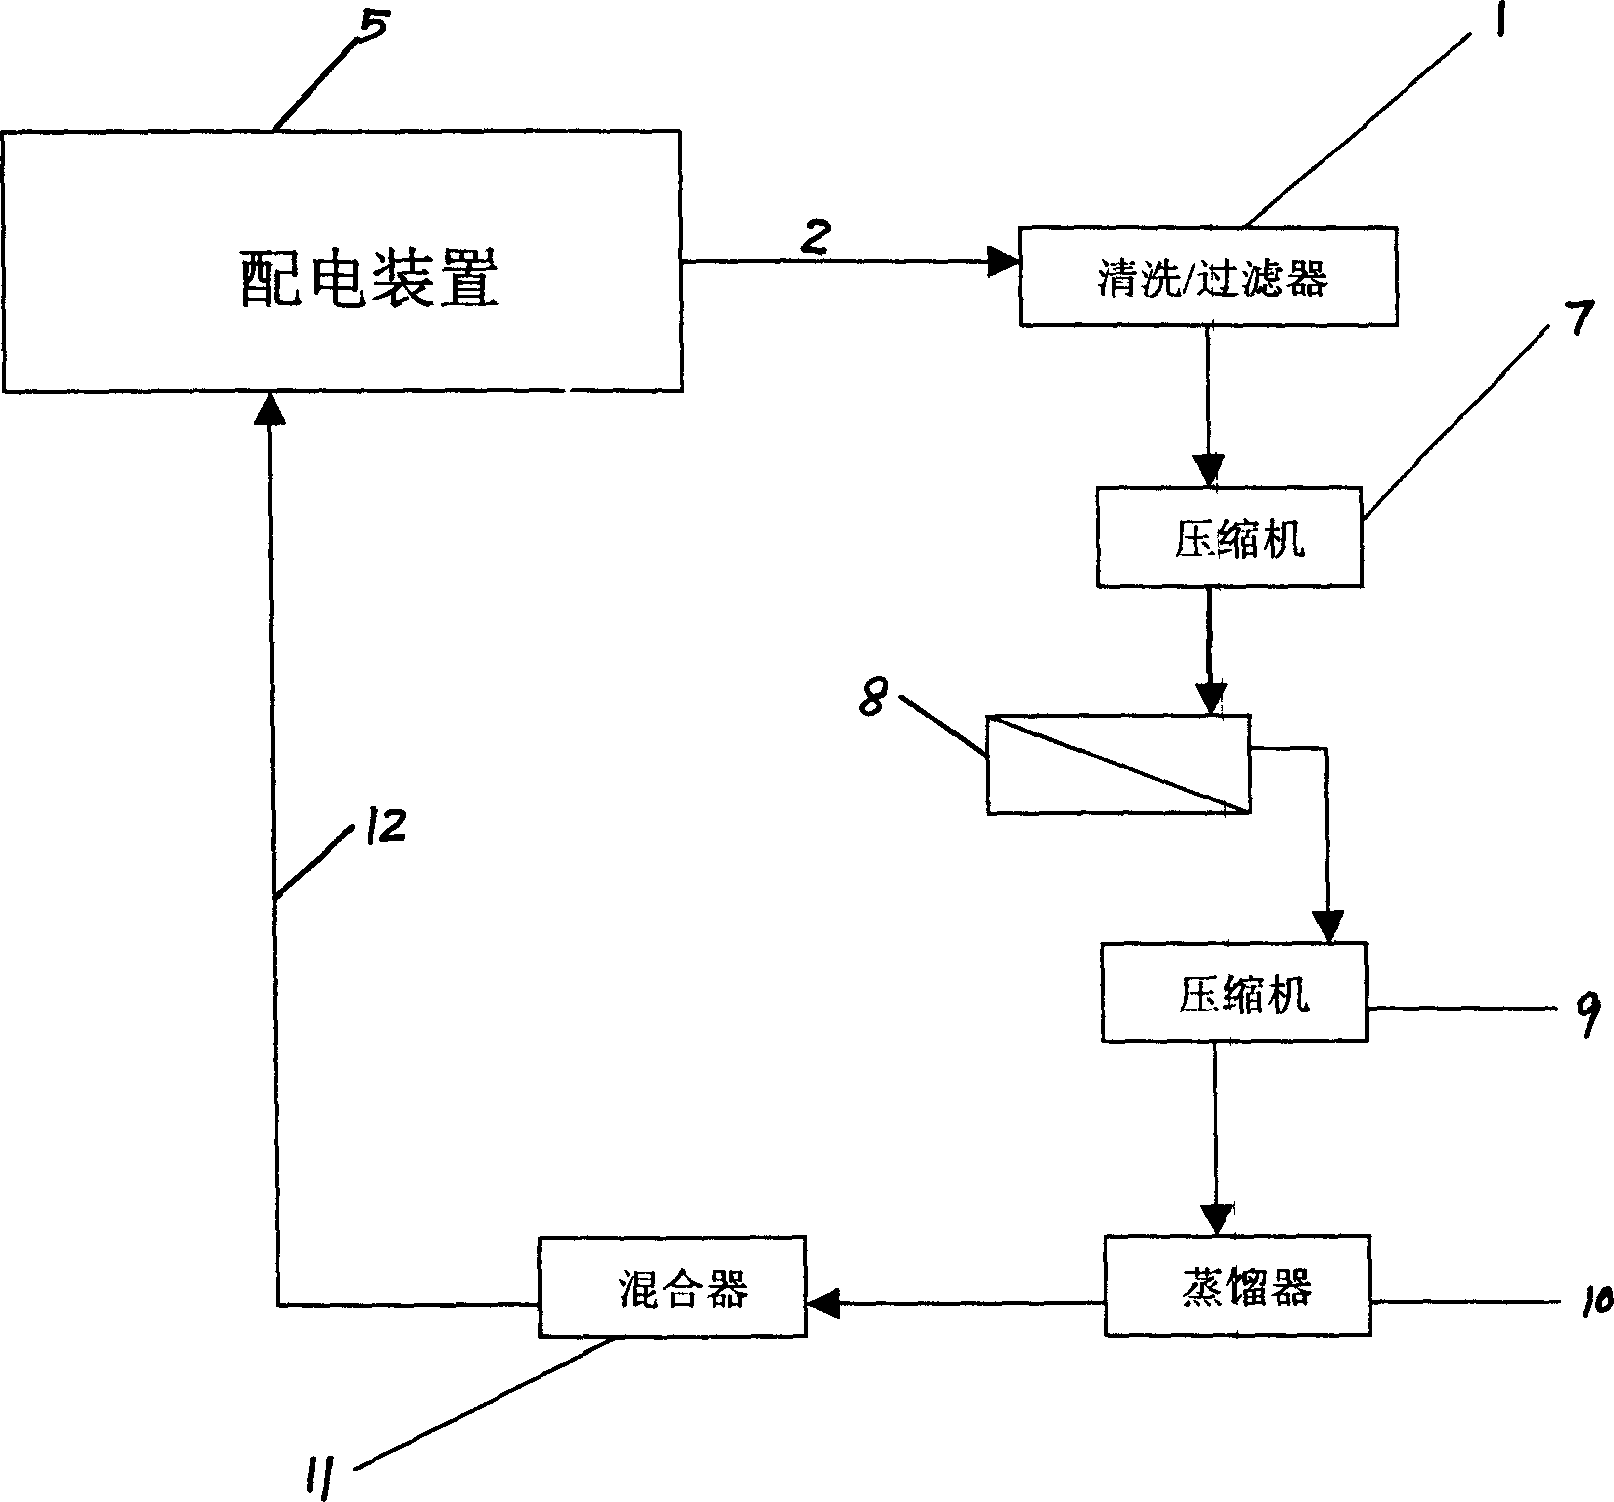 Method and equipment for recycling sulfur hexafluoride from power distribution unit